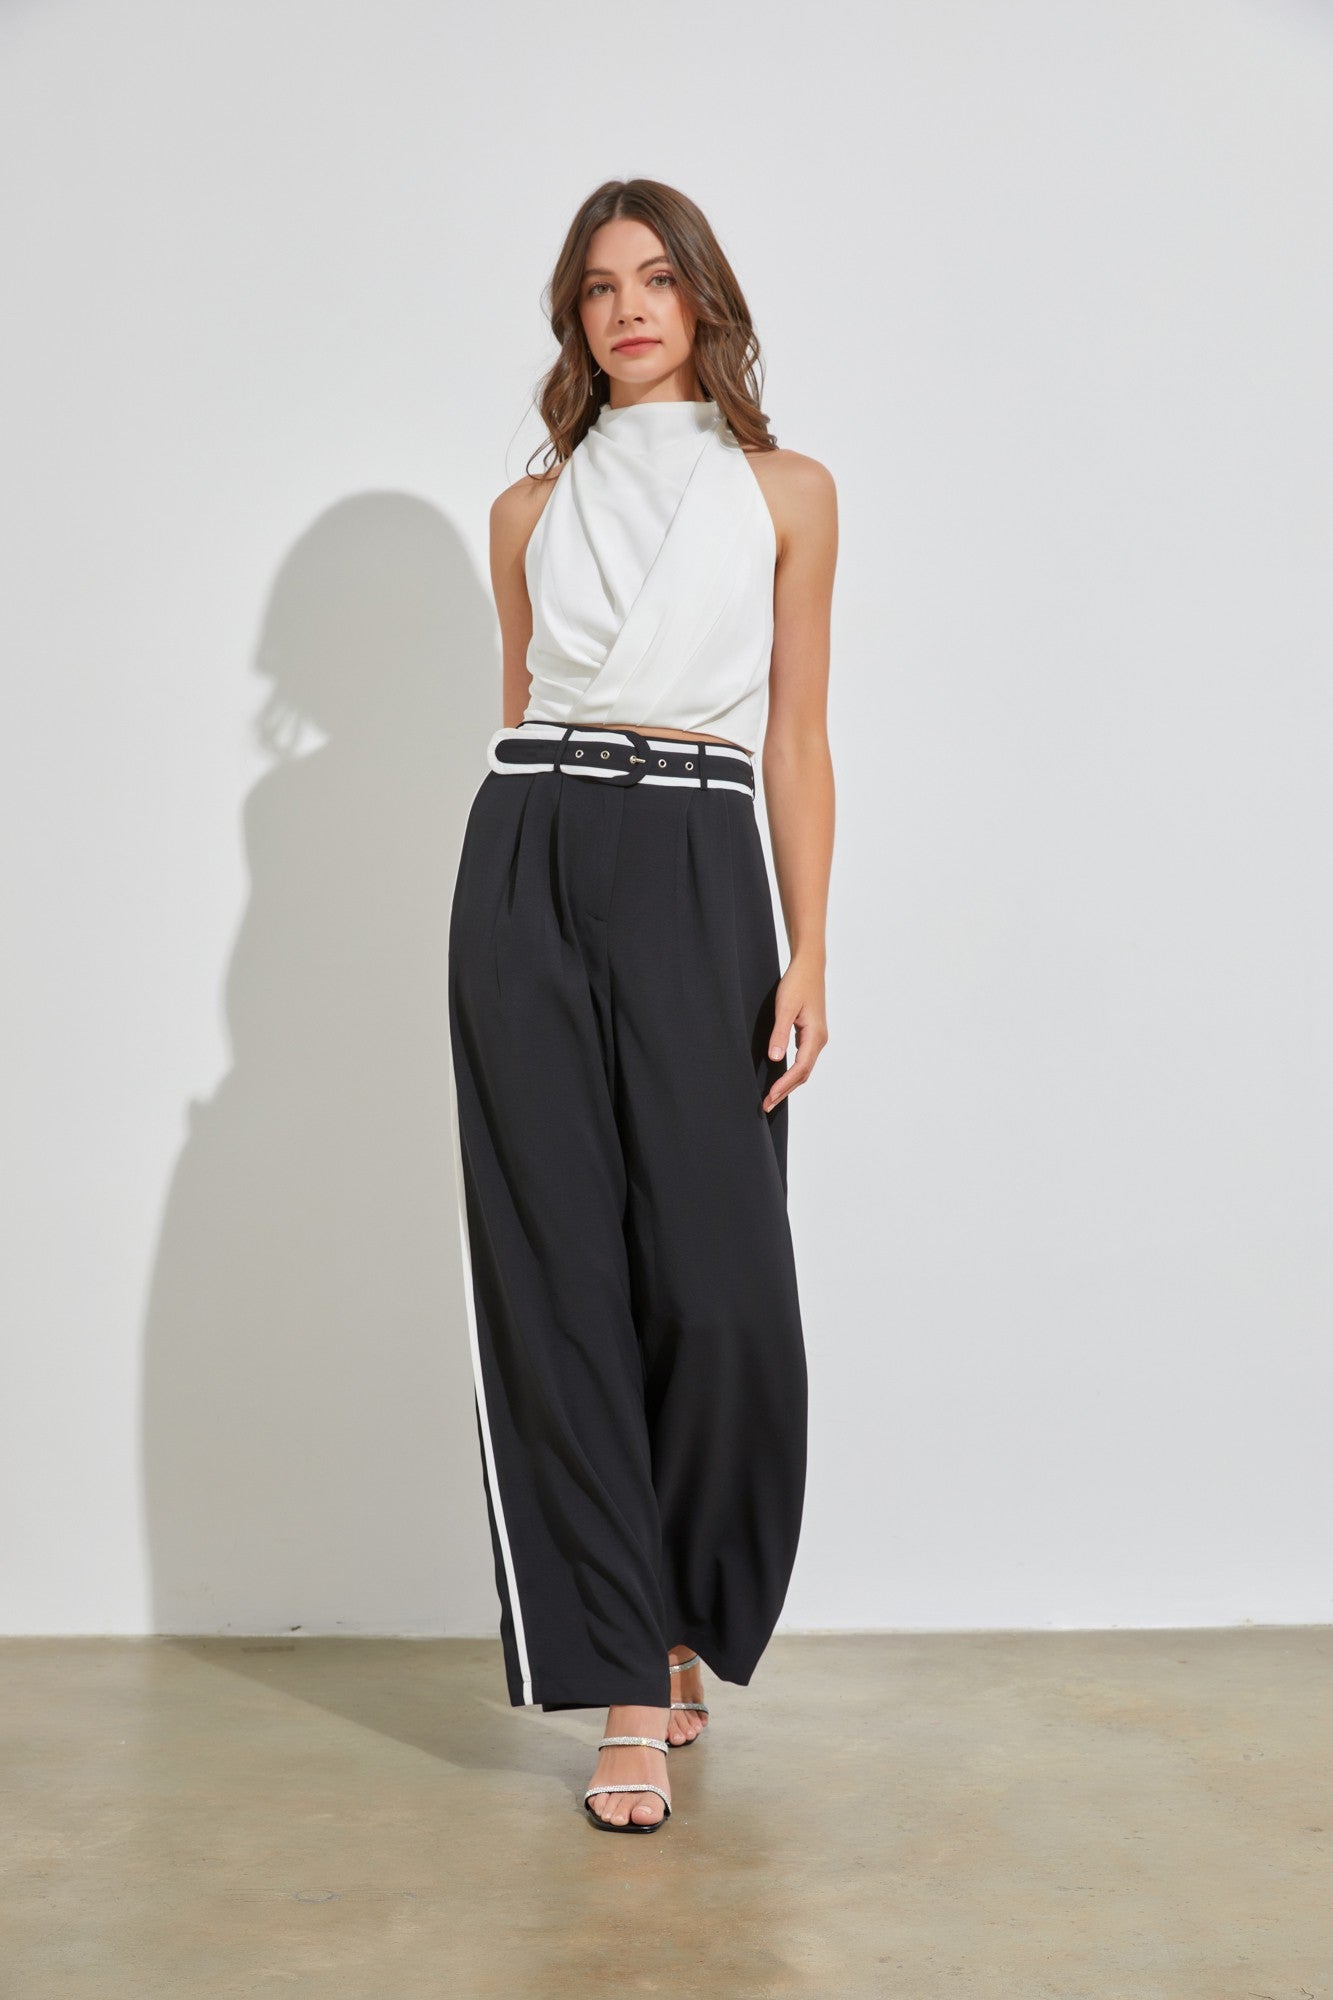 Belted Black and white pants